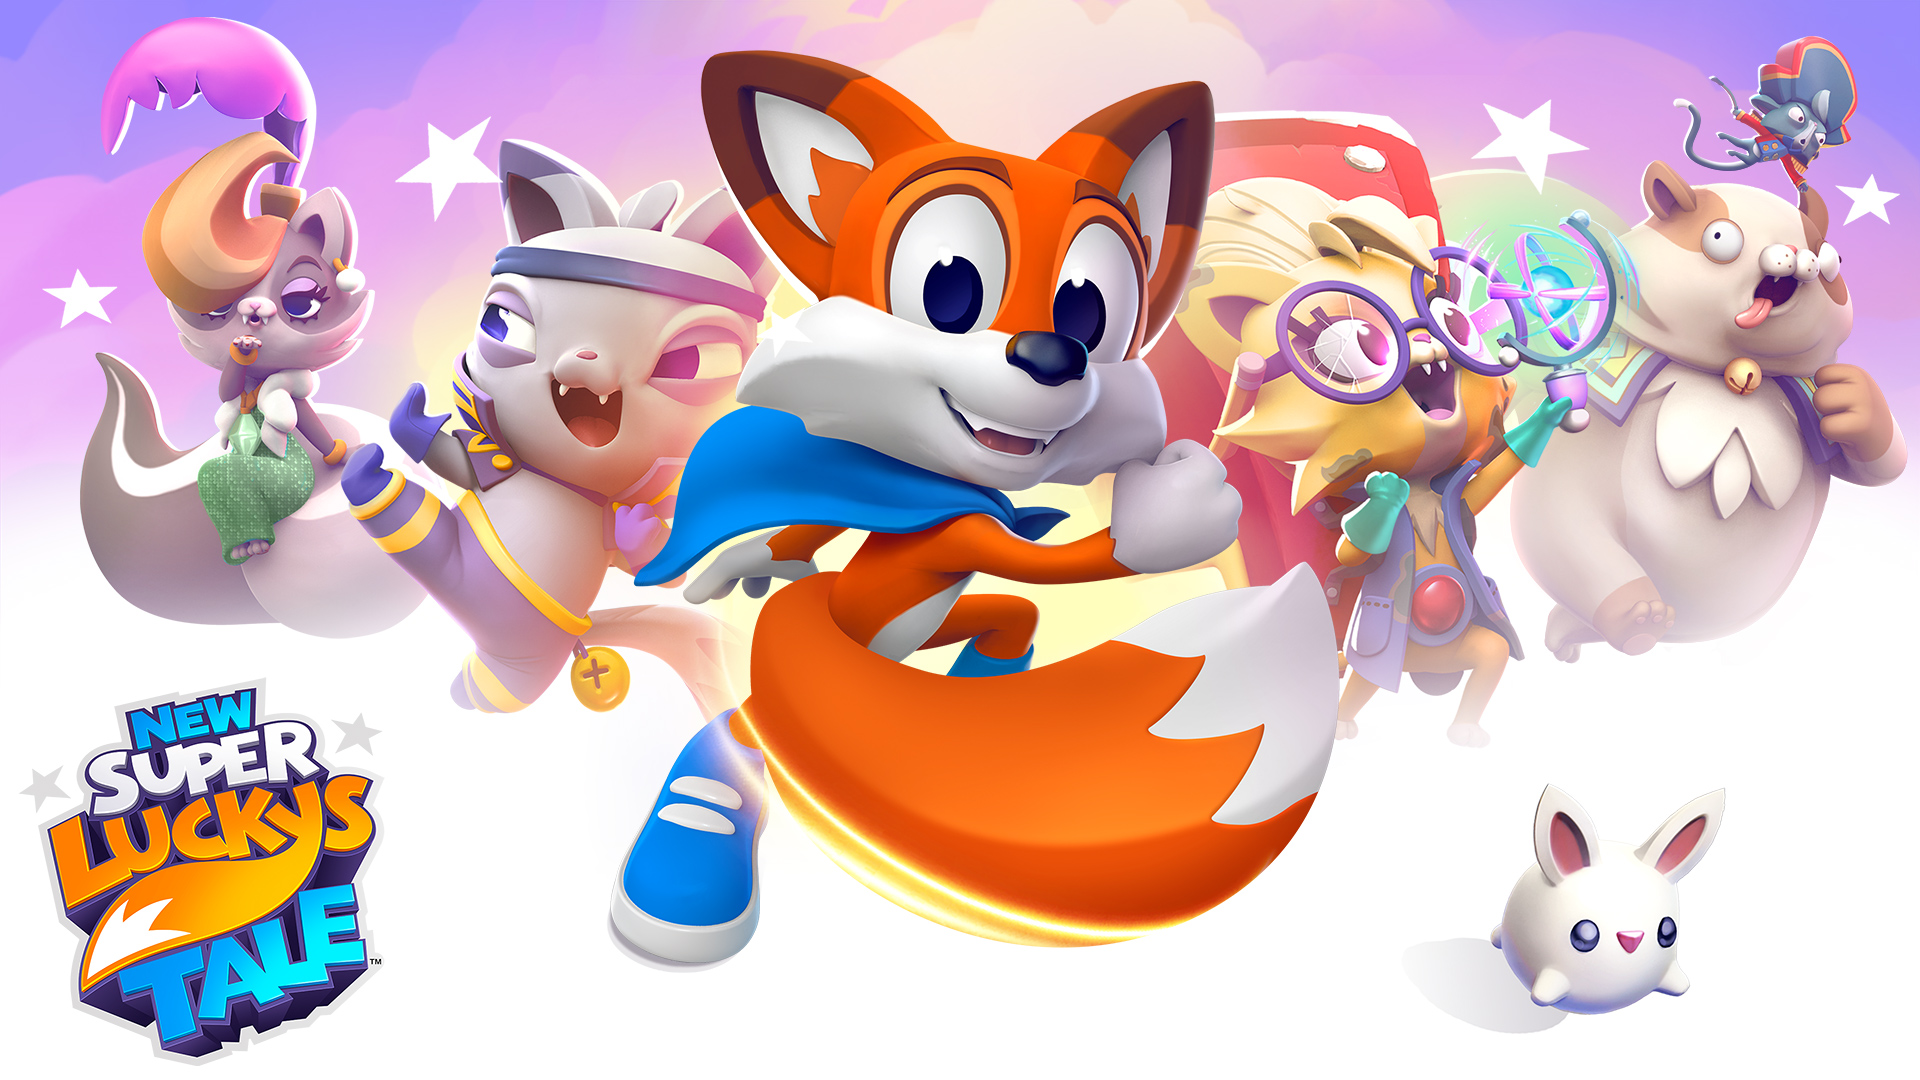 New Super Lucky’s Tale hits Xbox One and PS4.